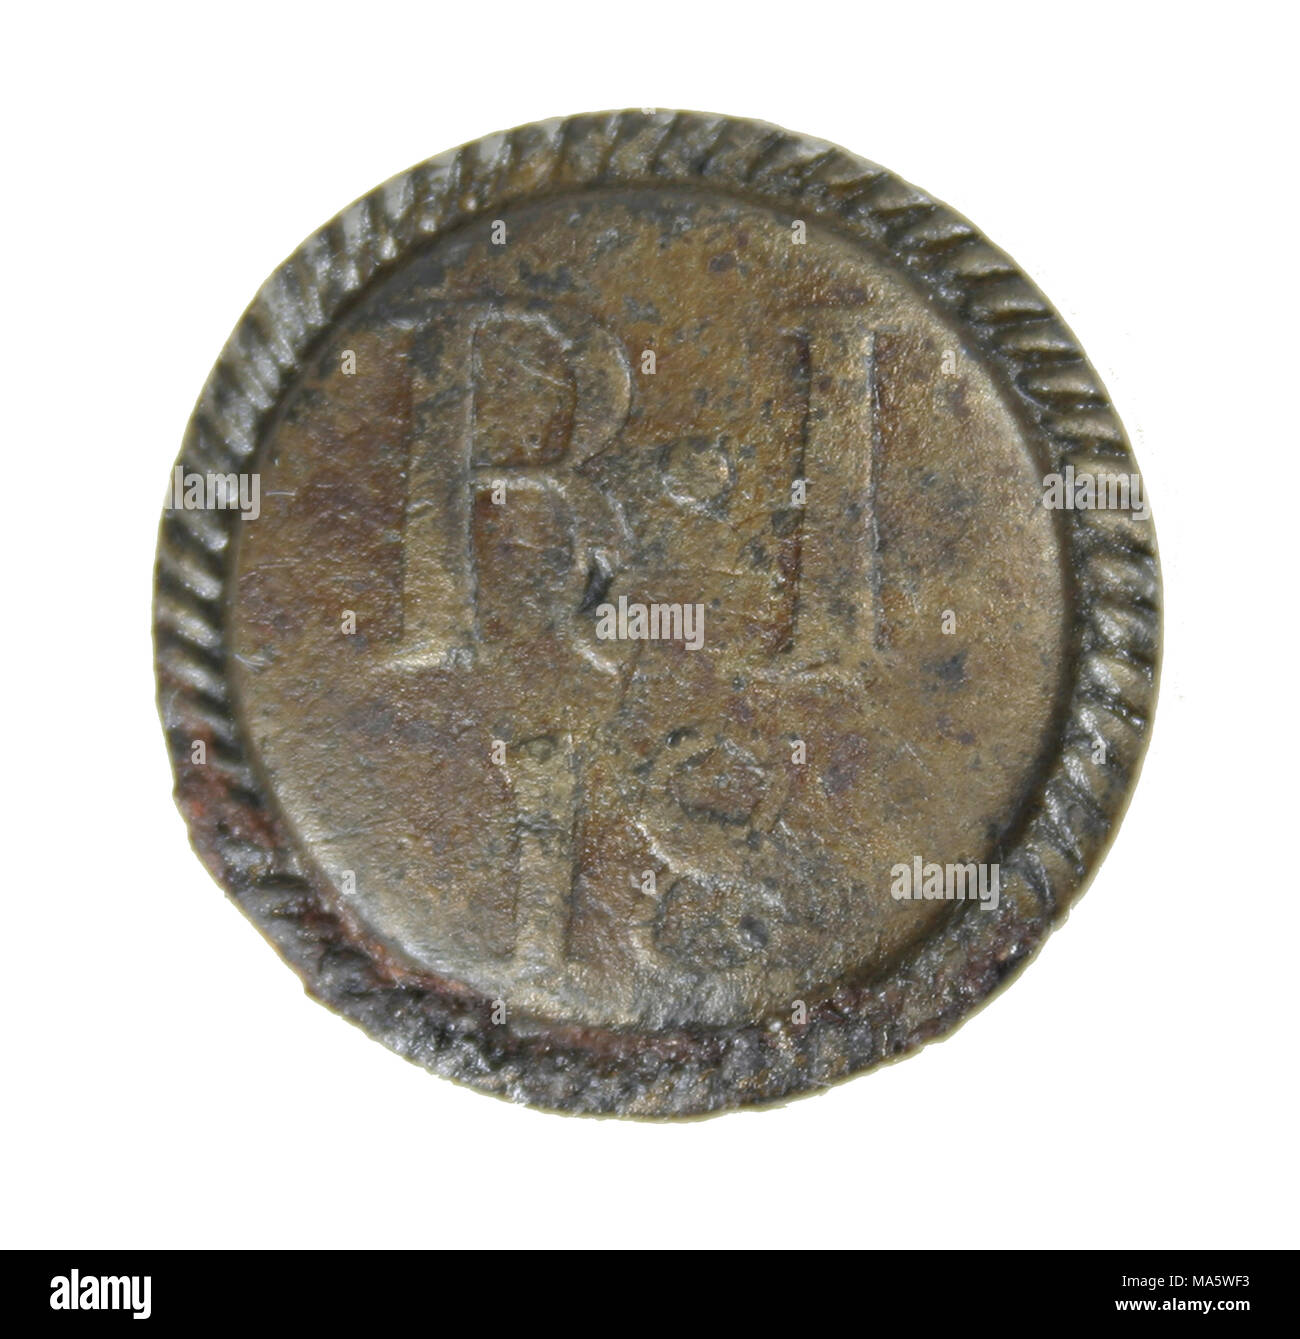 American Revolution. Pewter British soldier's button of the 18th Regiment of Foot (Royal Irish) which fought at Bunker Hill 1775 Stock Photo